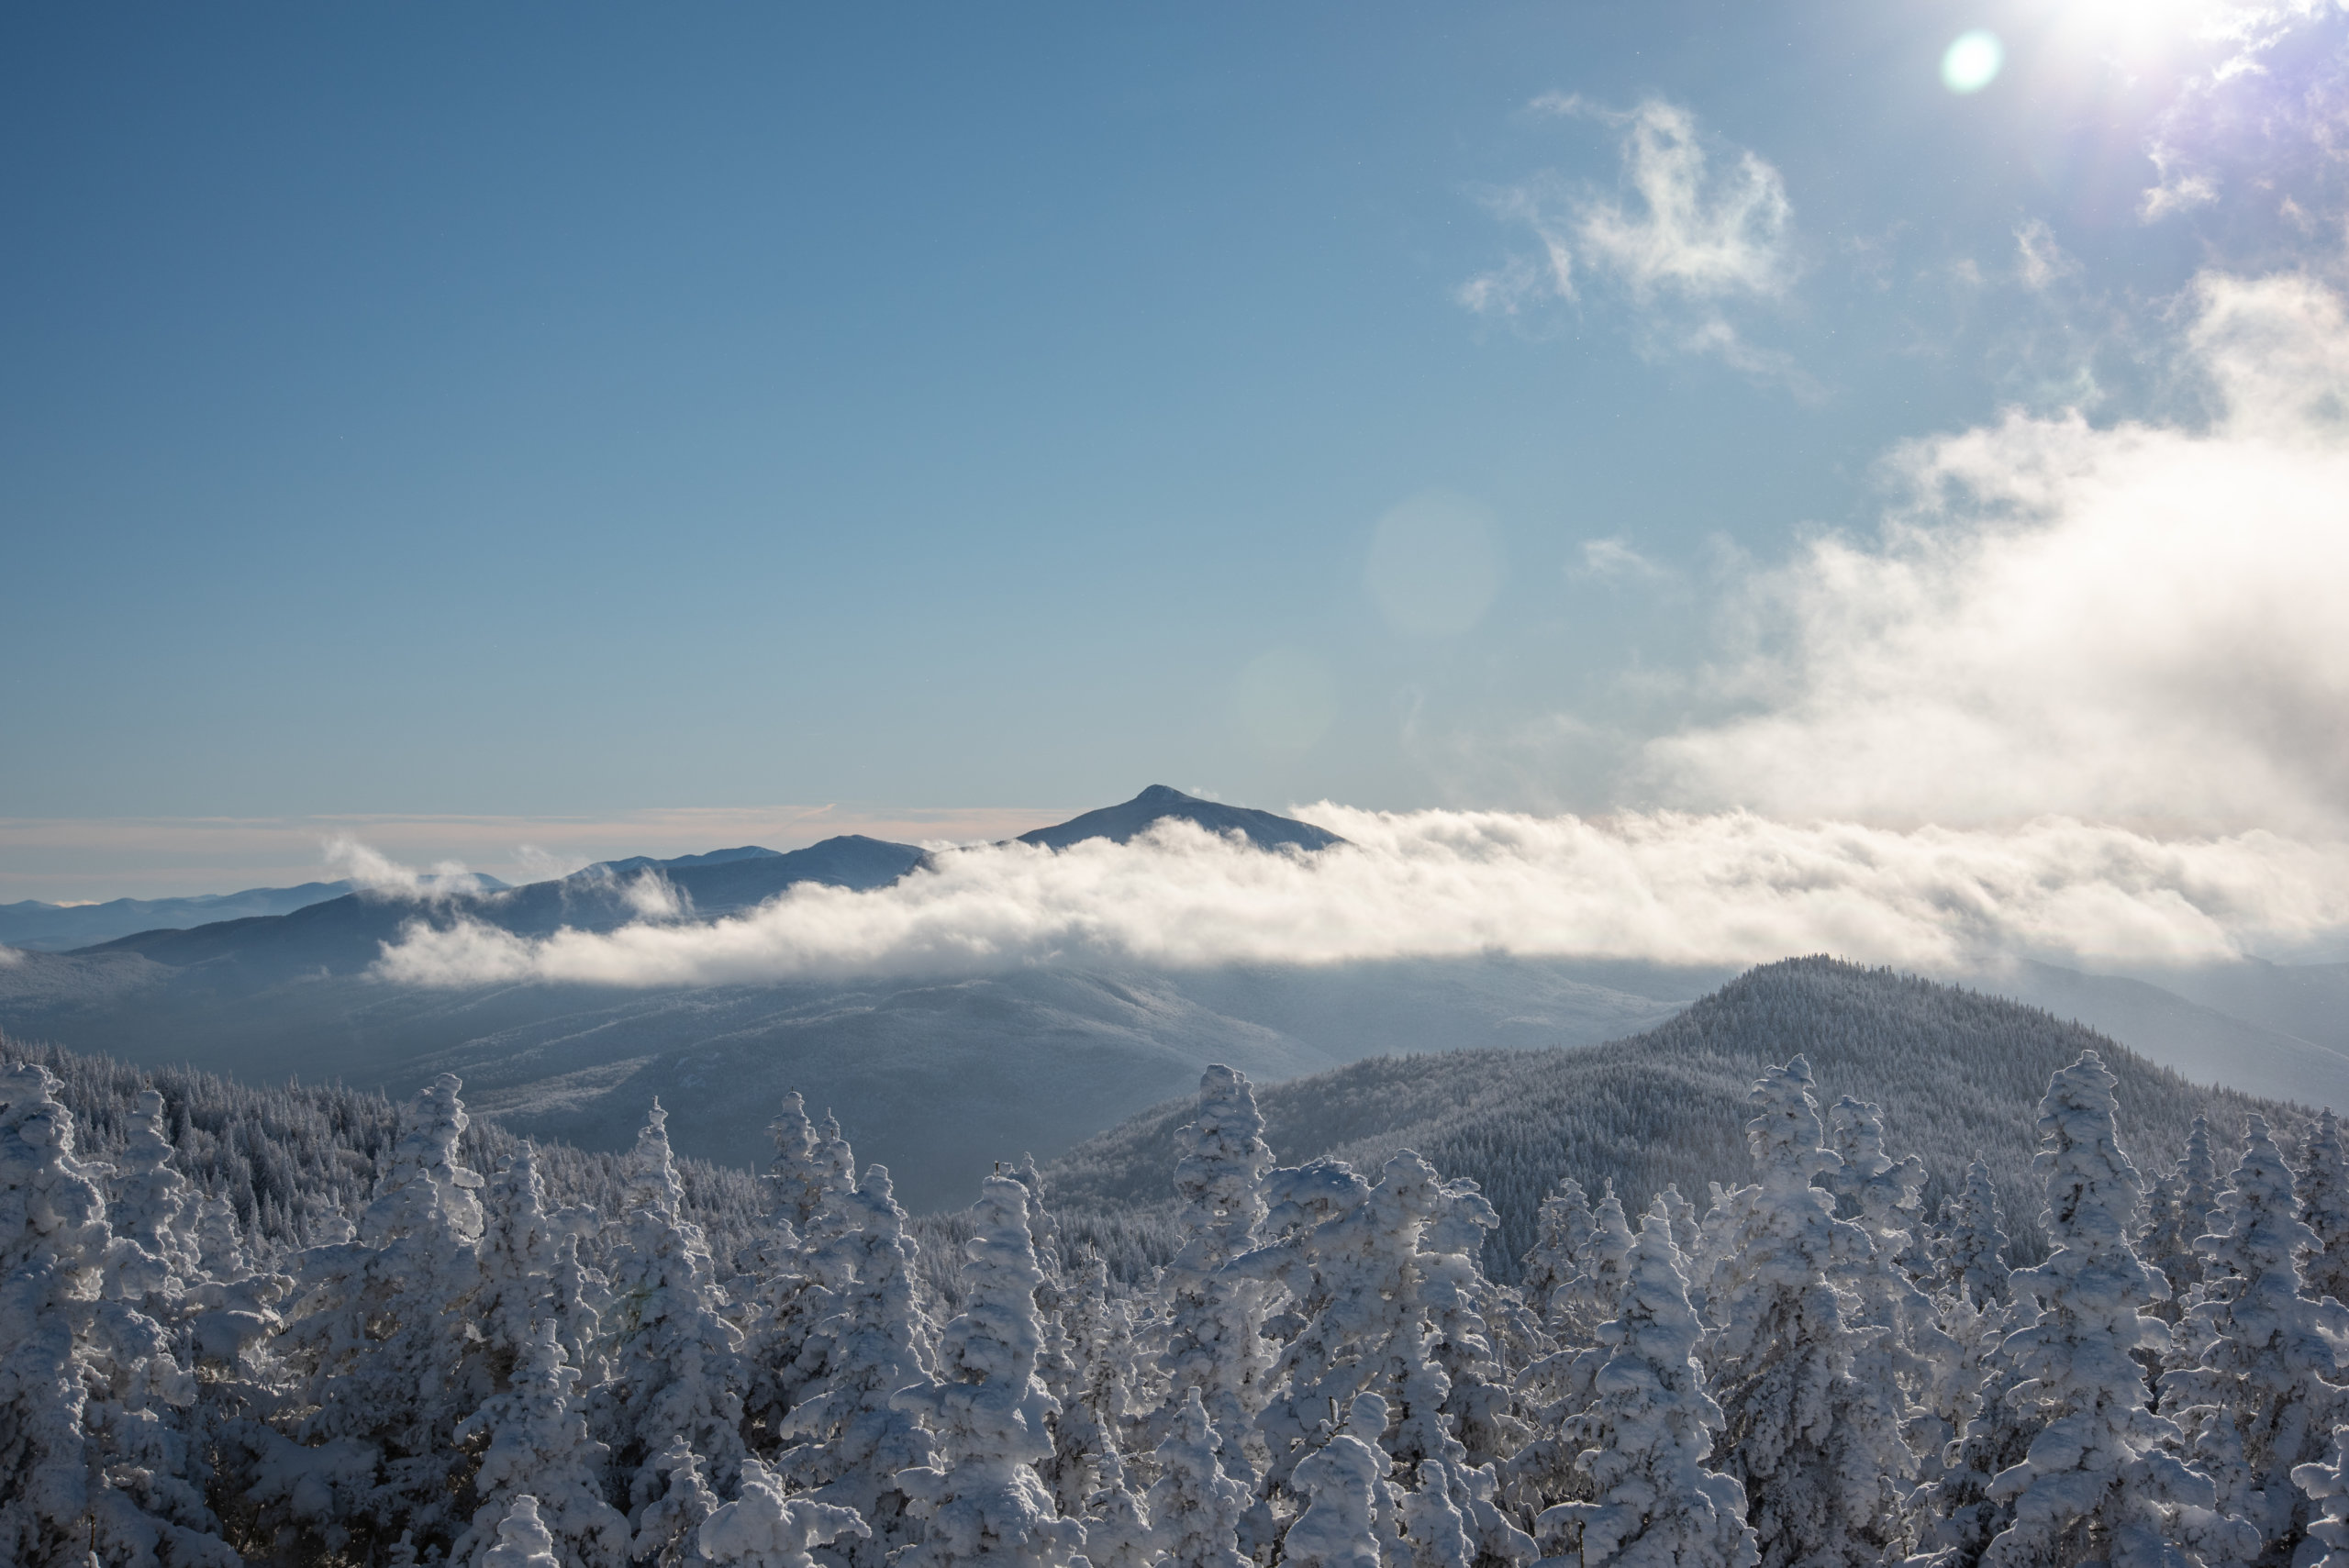 Beautiful View From the Summit of Bolton Valley Ski Resort Looking South to Camel's Hump Poking Out Through The Clouds